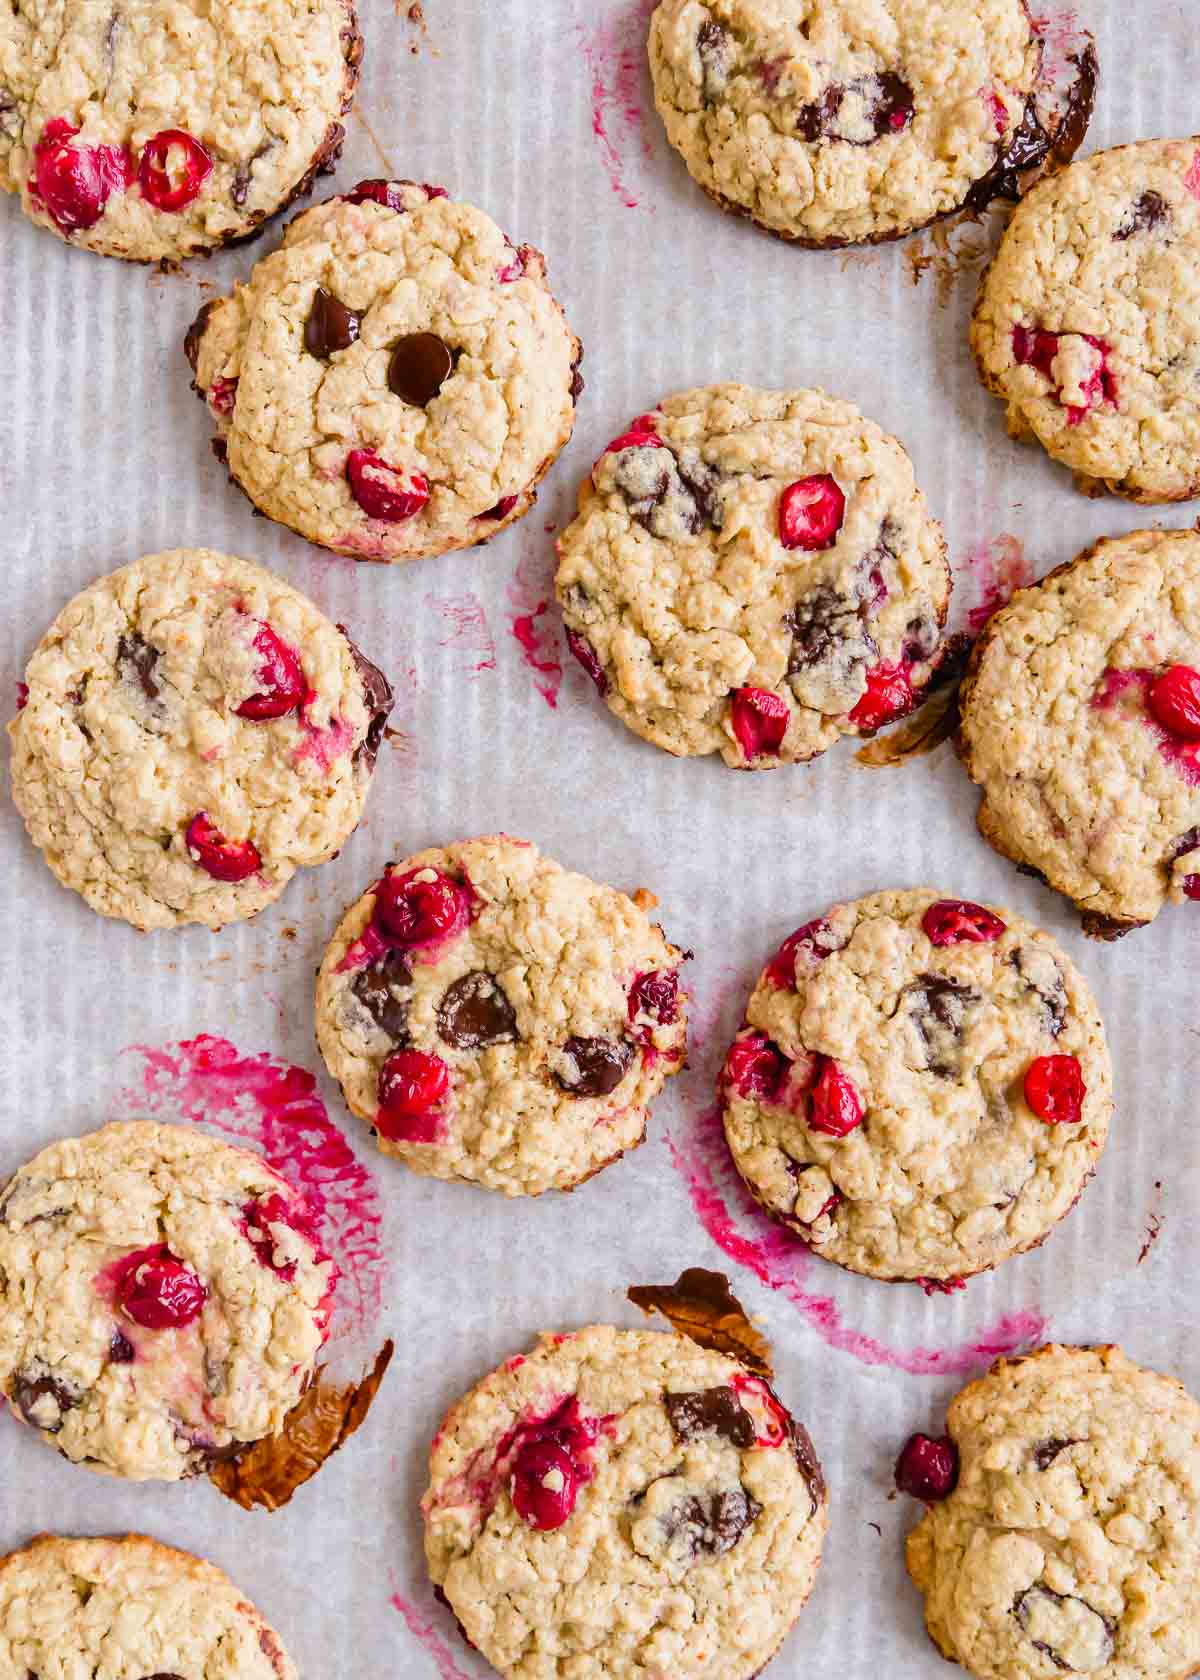 Baked cranberry chocolate chip cookies on a baking sheet.